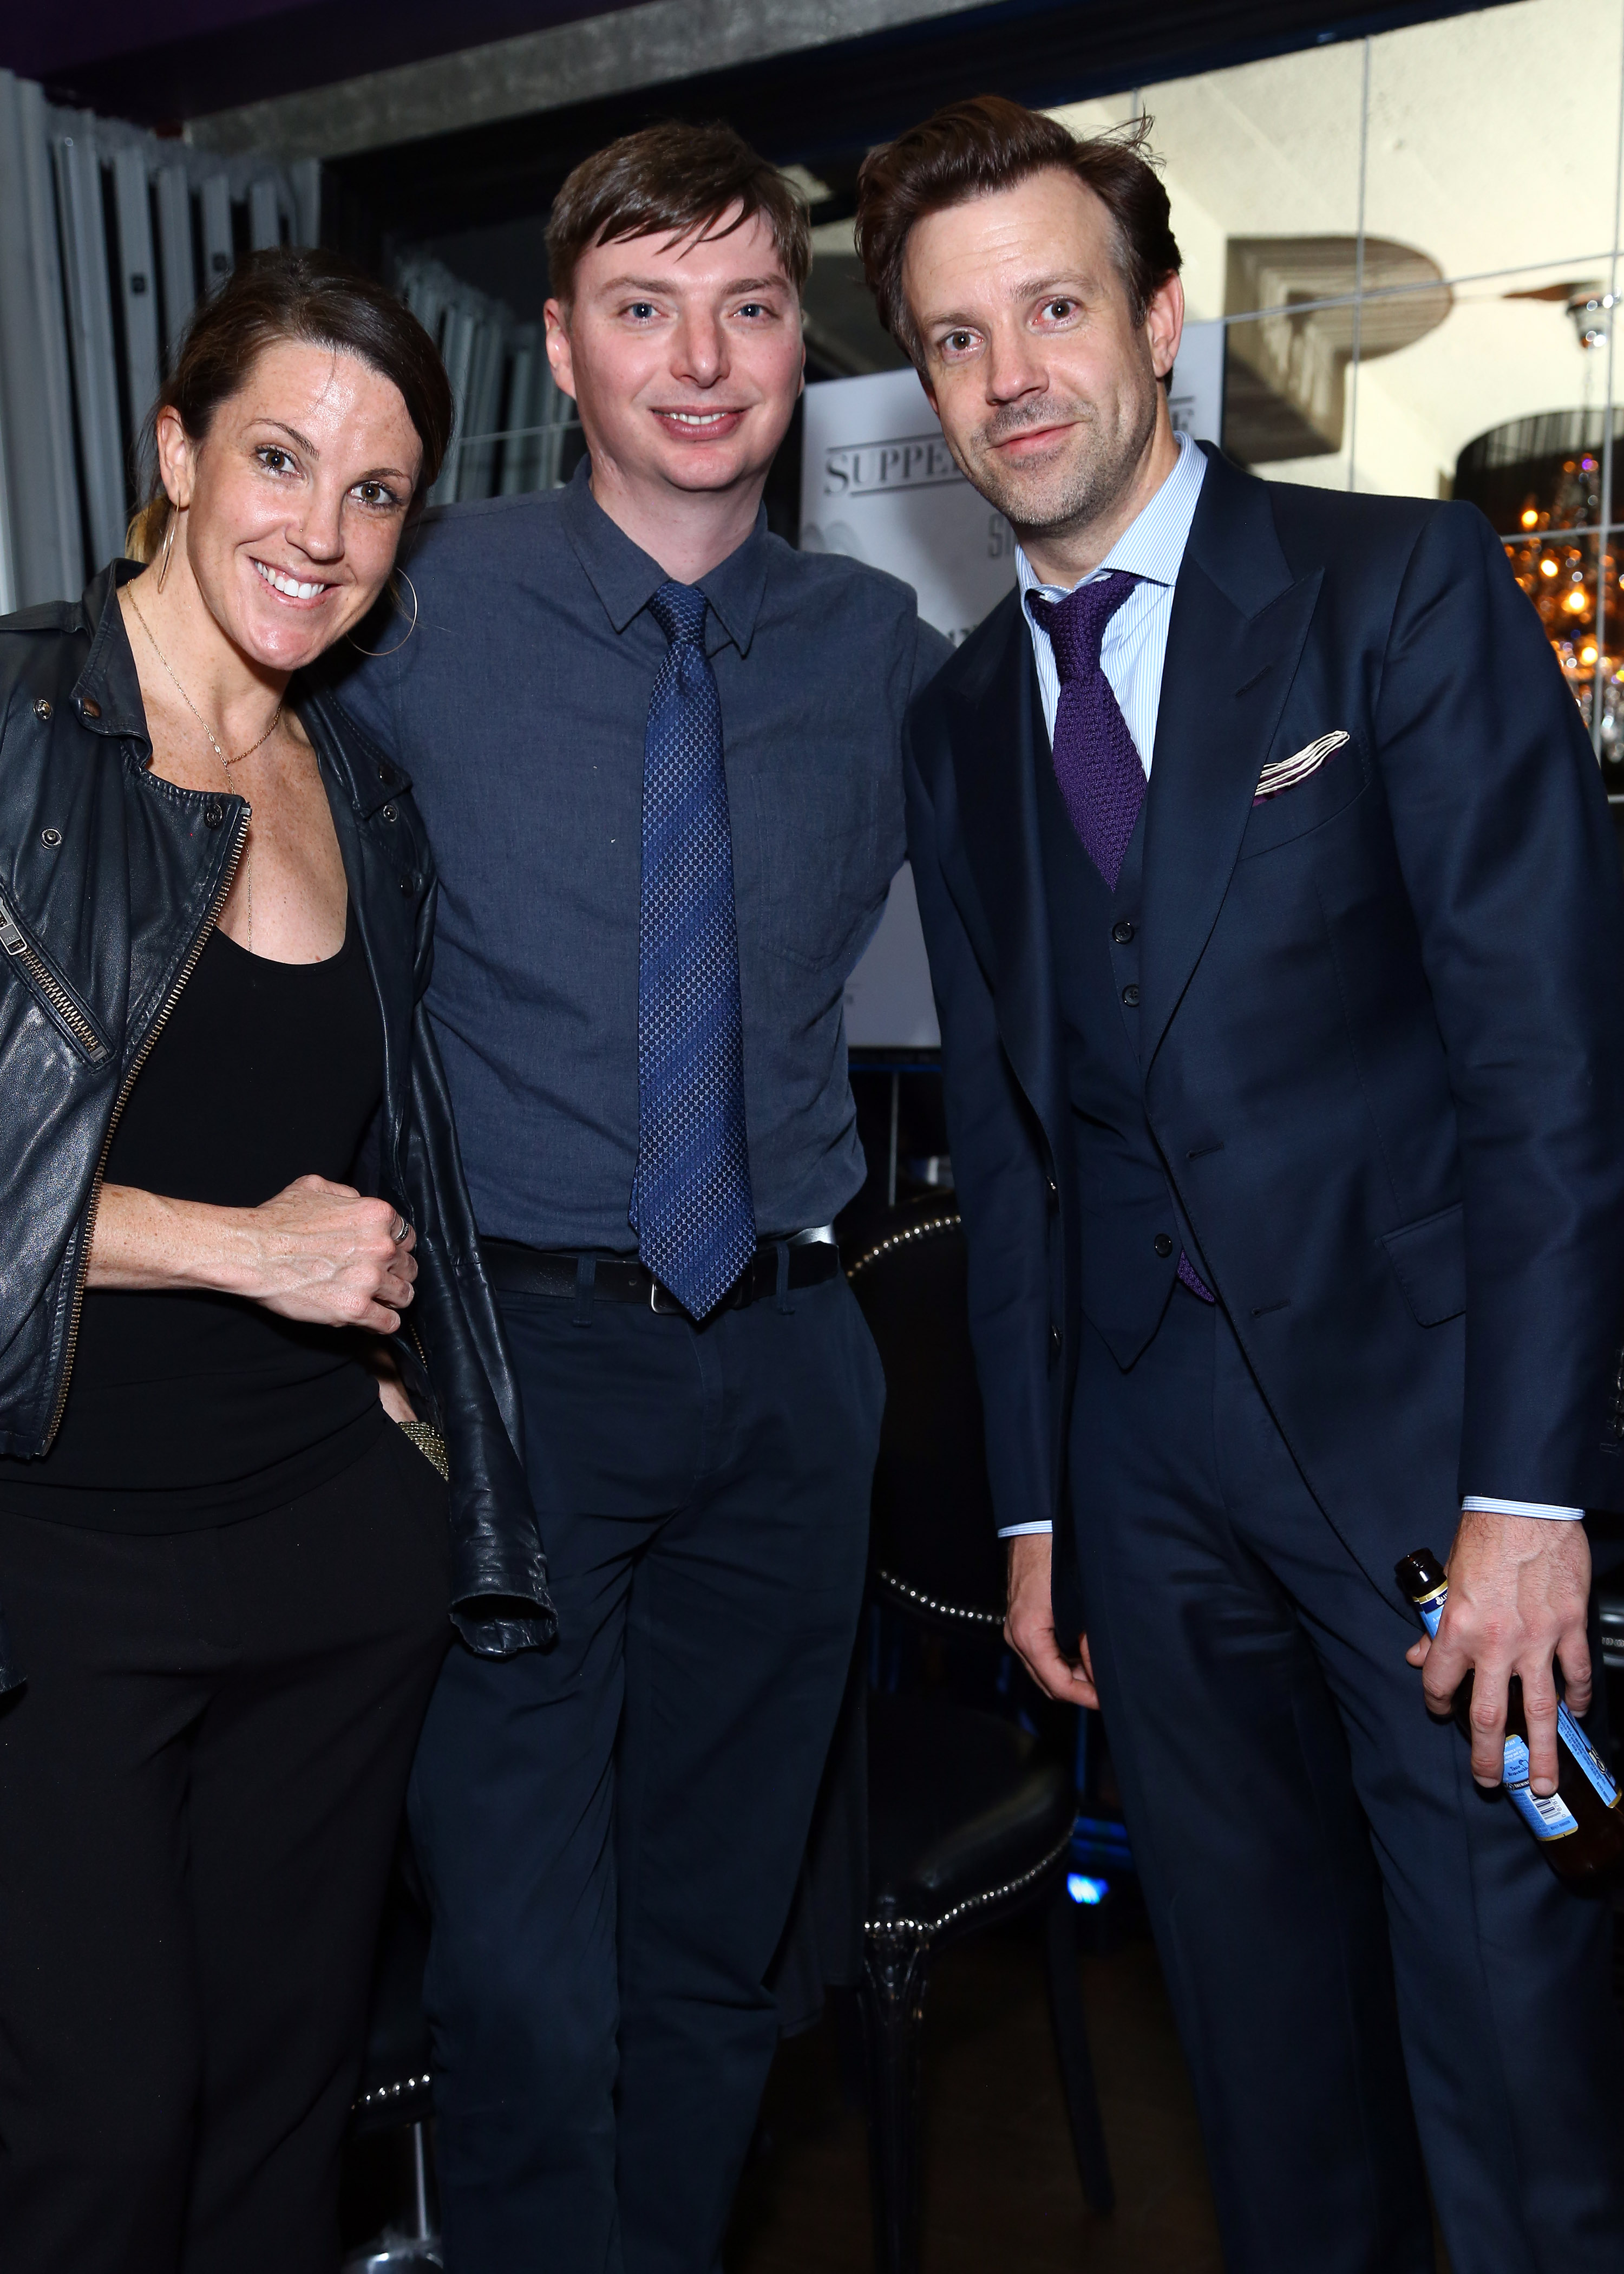 A-List Communications' Supper Suite by STK Served up Celebrities and Top Films Premiering at the Tribeca Film Festival